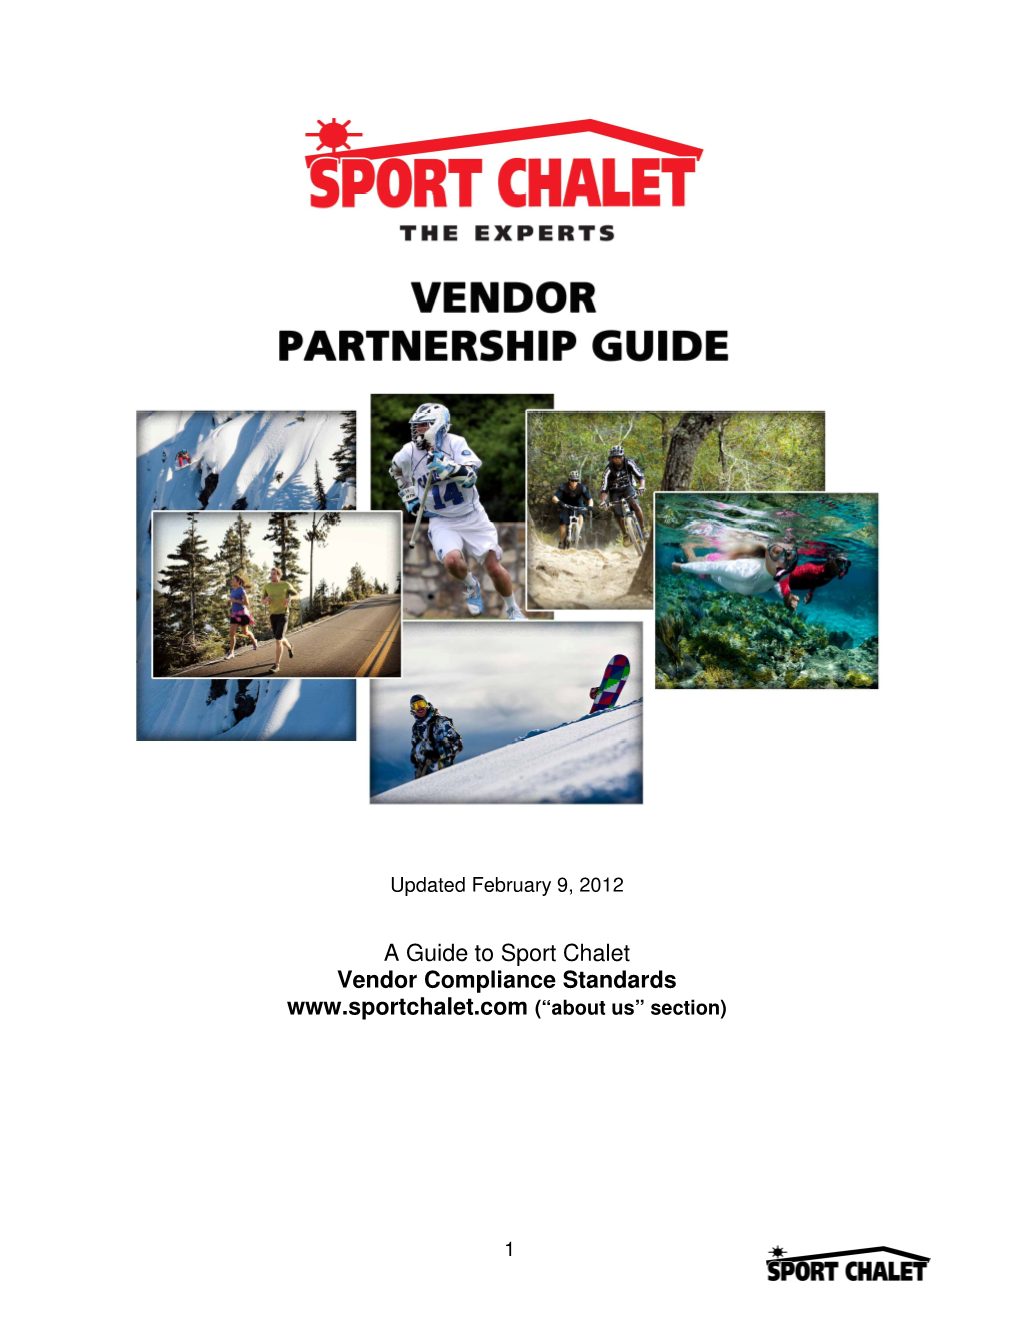 A Guide to Sport Chalet Vendor Compliance Standards (“About Us” Section)